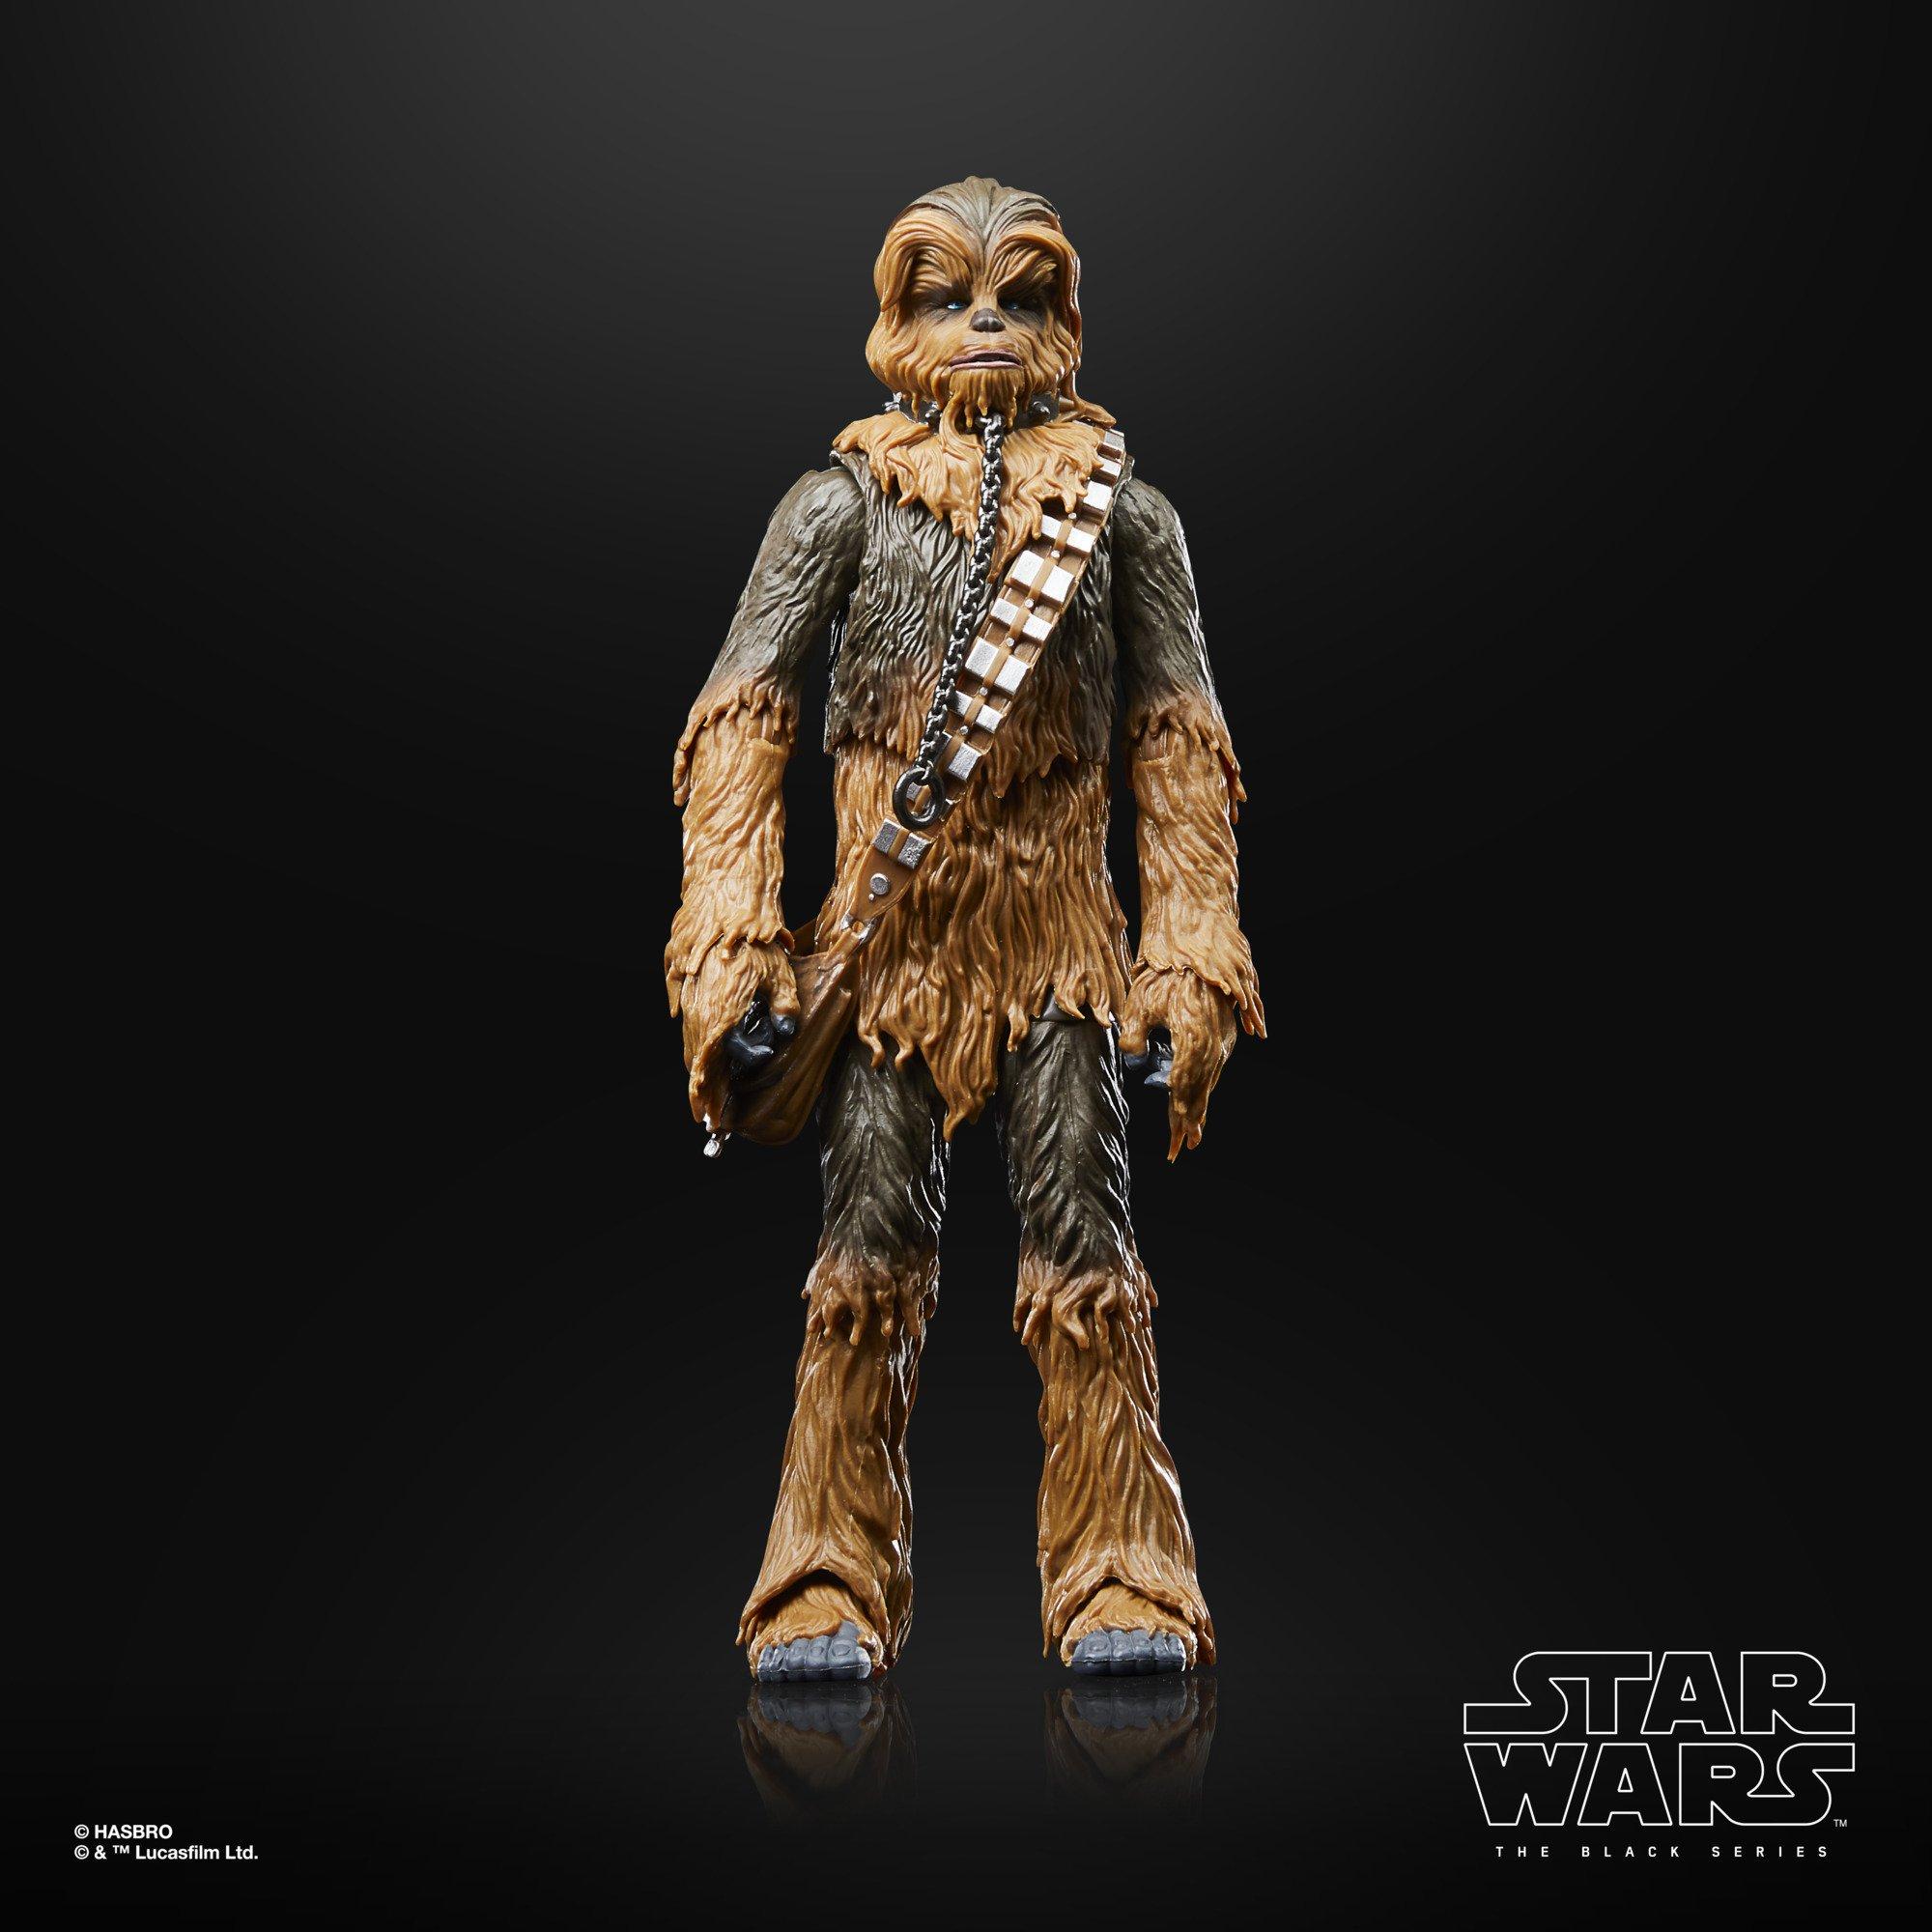 Hasbro Star Wars The Black Series Star Wars: Return of the Jedi Chewbacca 6-in Action Figure